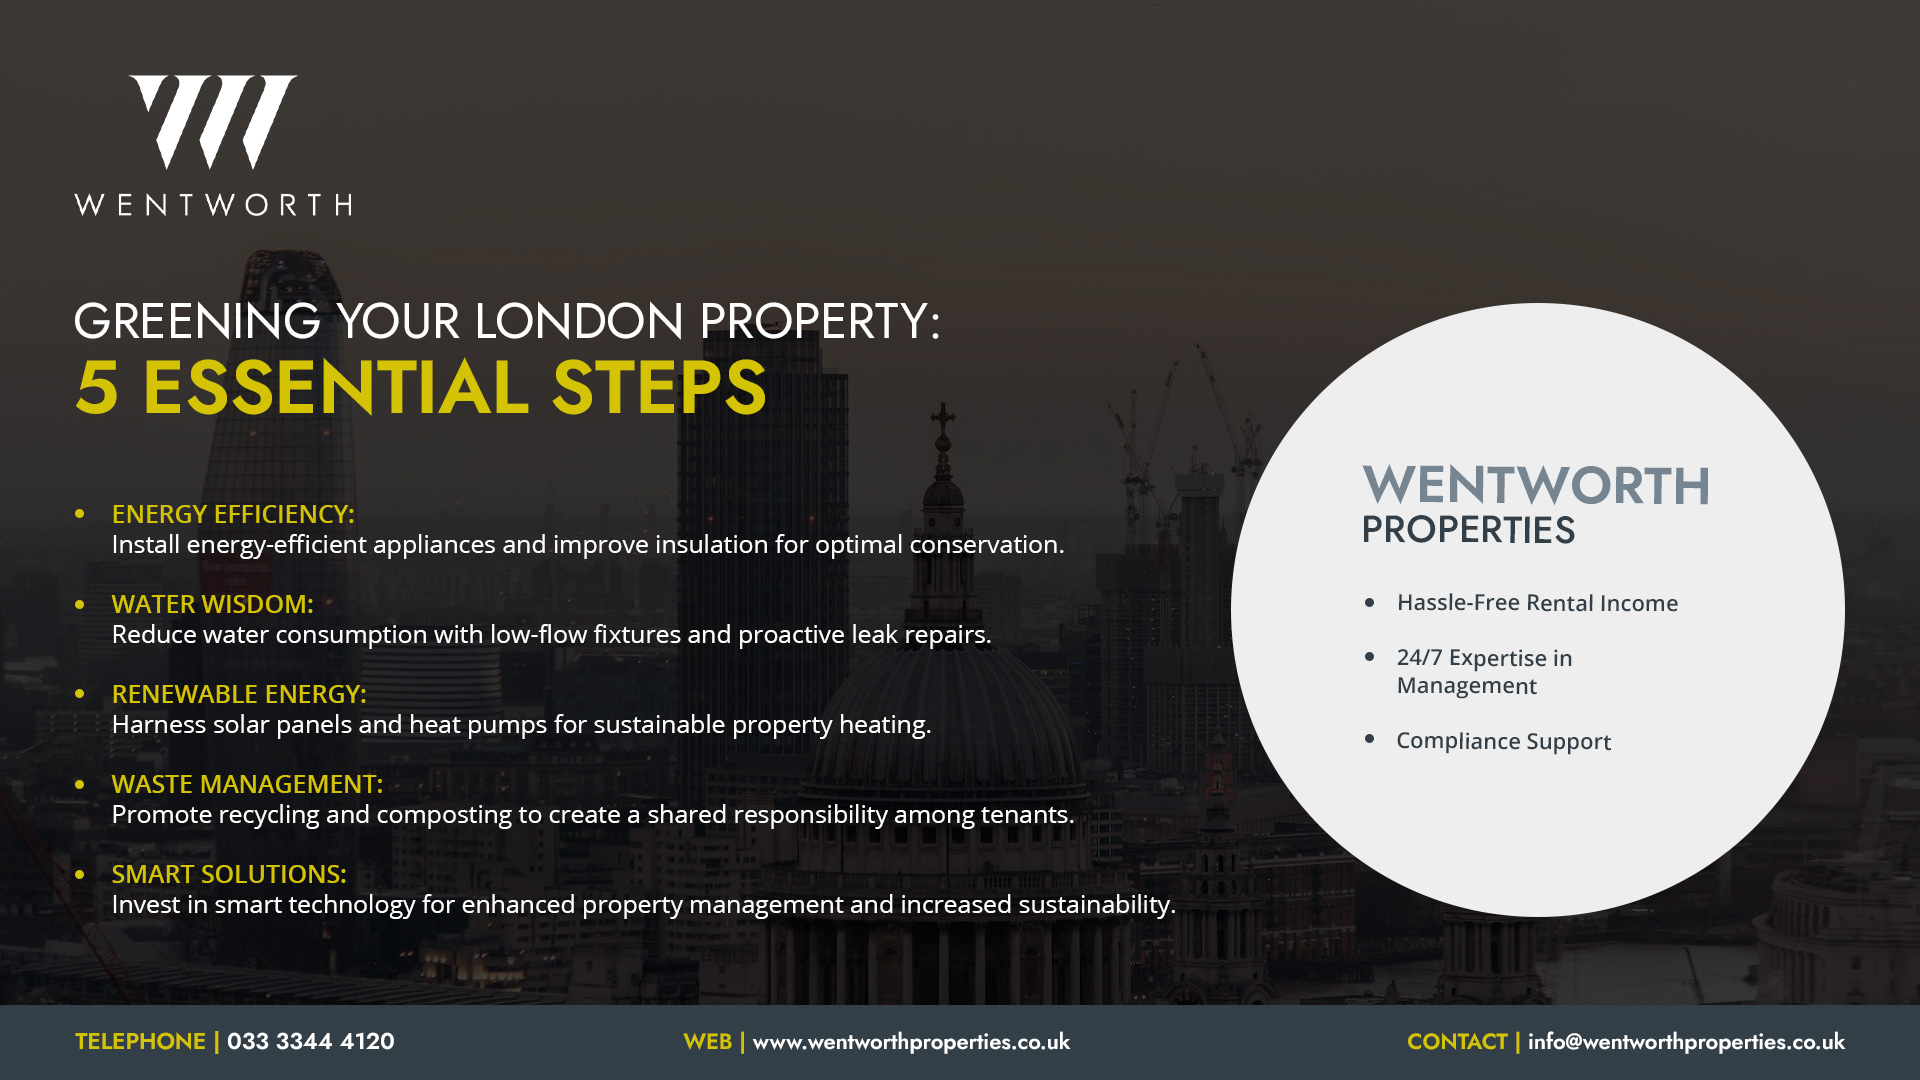 Information about 5 essential steps on greening your London property